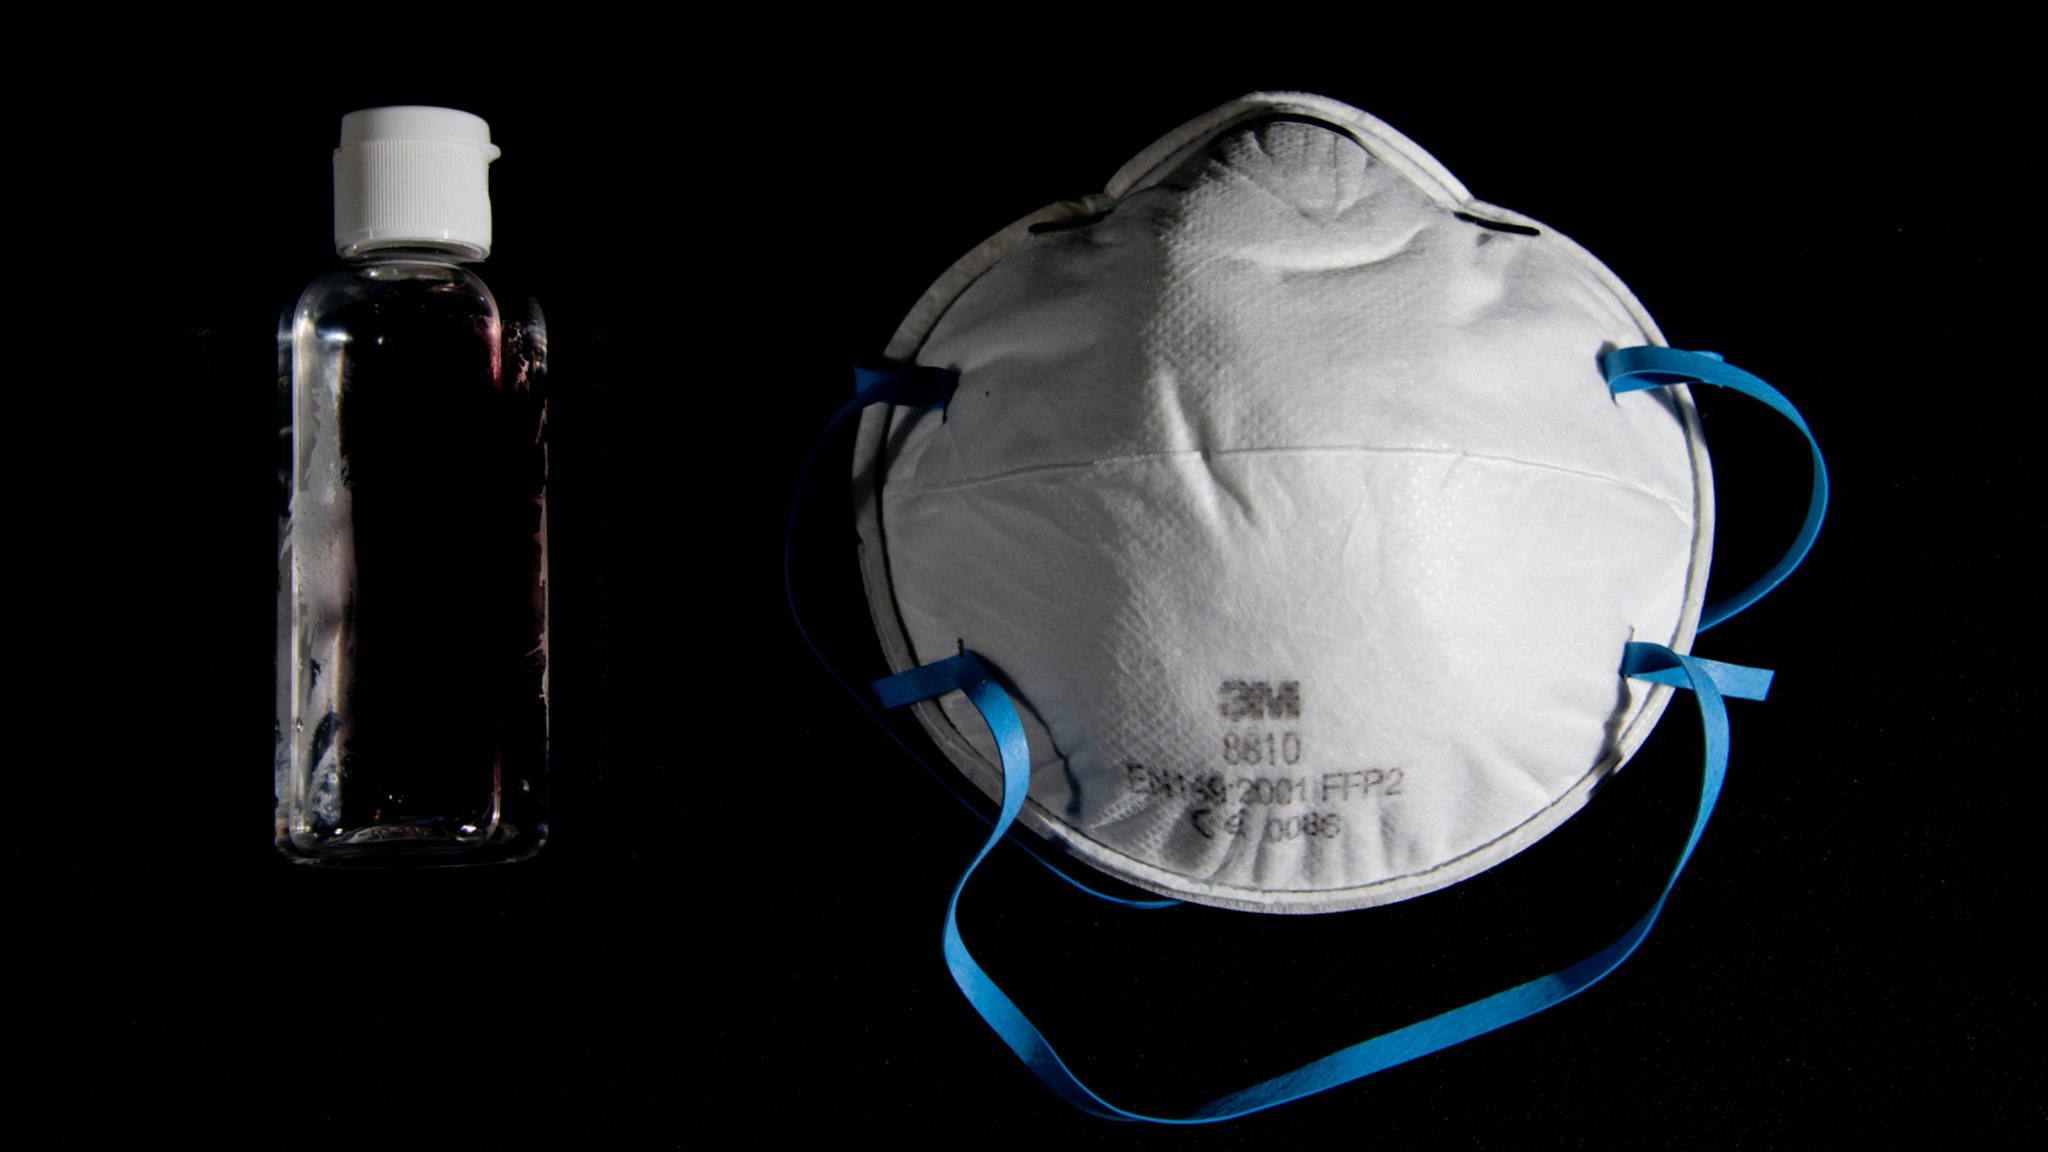 A picture taken on March 4, 2020, in Paris, shows a bottle of alcohol gel hand sanitiser and an FFP2 protective face mask. - Sales of face masks and hand sanitiser have risen and shortages are occuring in countries affected by the spread of COVID-19, the new coronavirus.